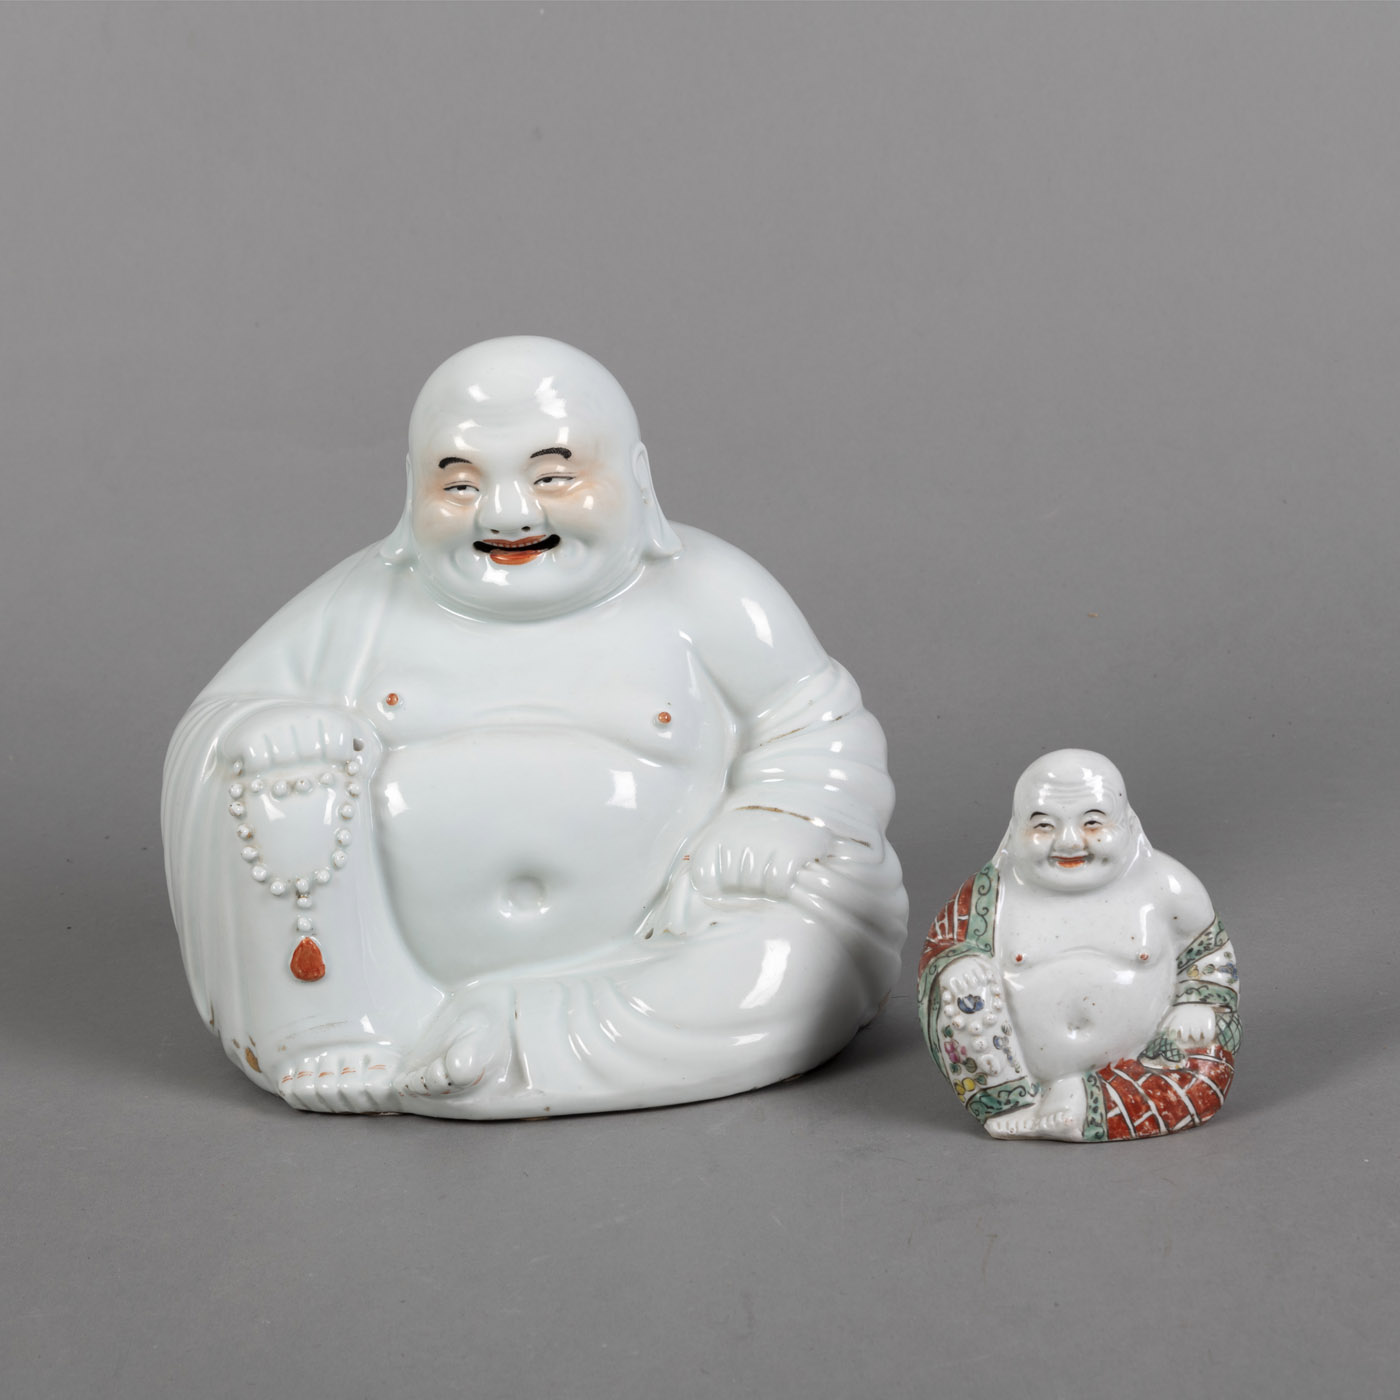 <b>TWO POLYCHROME PAINTED PORCELAIN FIGURES OF THE BUDAI</b>